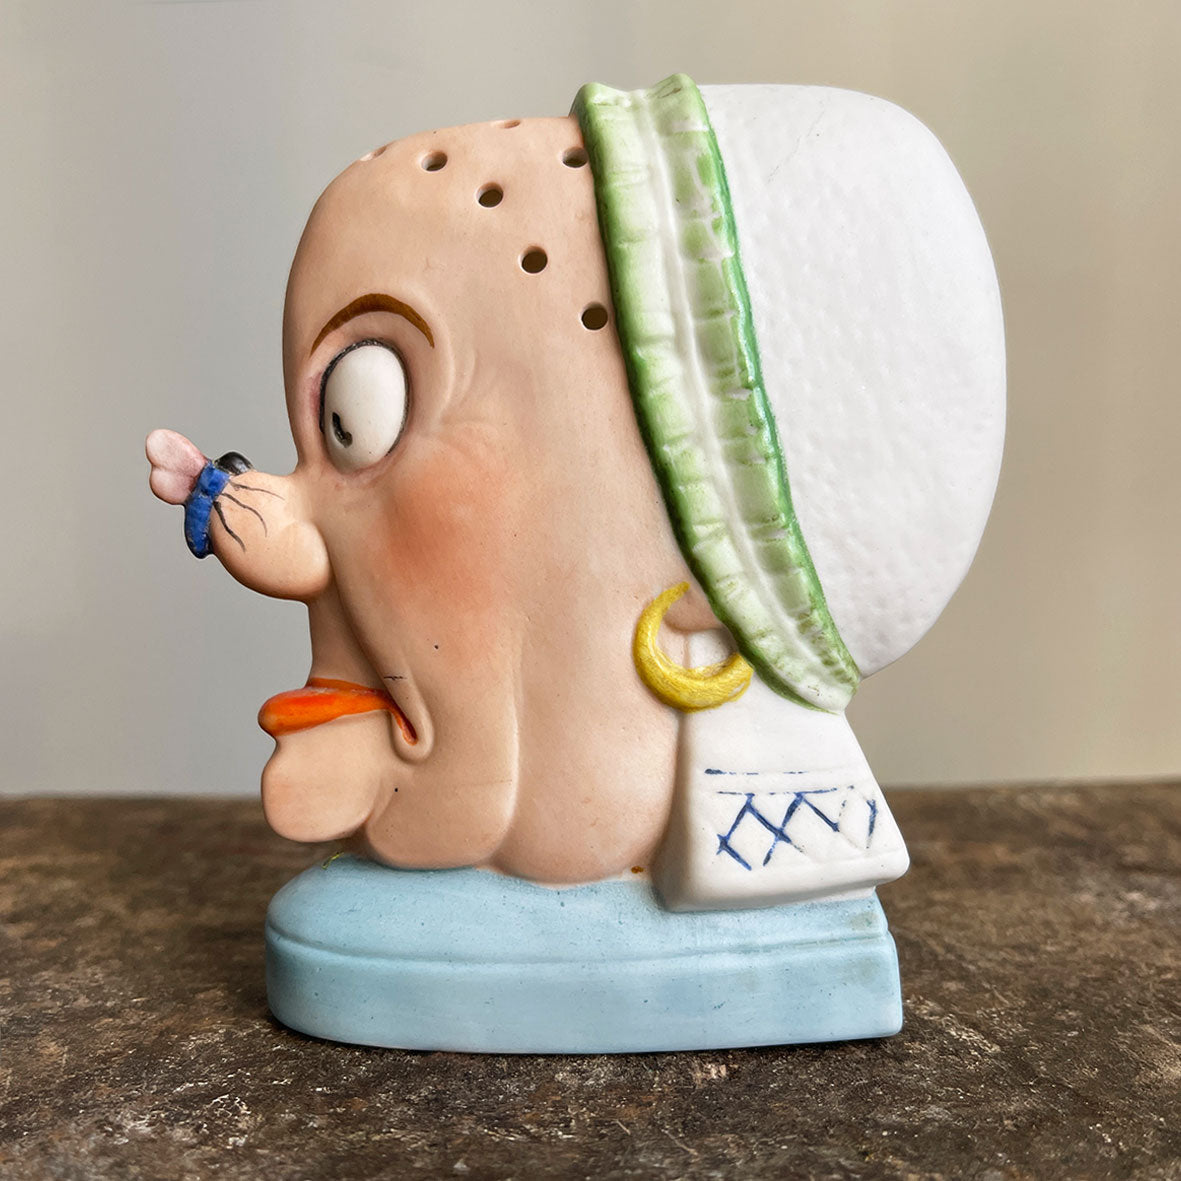 A rare German Porcelain Smoking Ashtray by Schafer & Vater. These unusual objects were used as ashtrays with the smoke of the cigarette escaping through the pierced holes. This one sees an old ugly maid with a fly perched on her nose! SHOP NOW - www.intovintage.co.uk